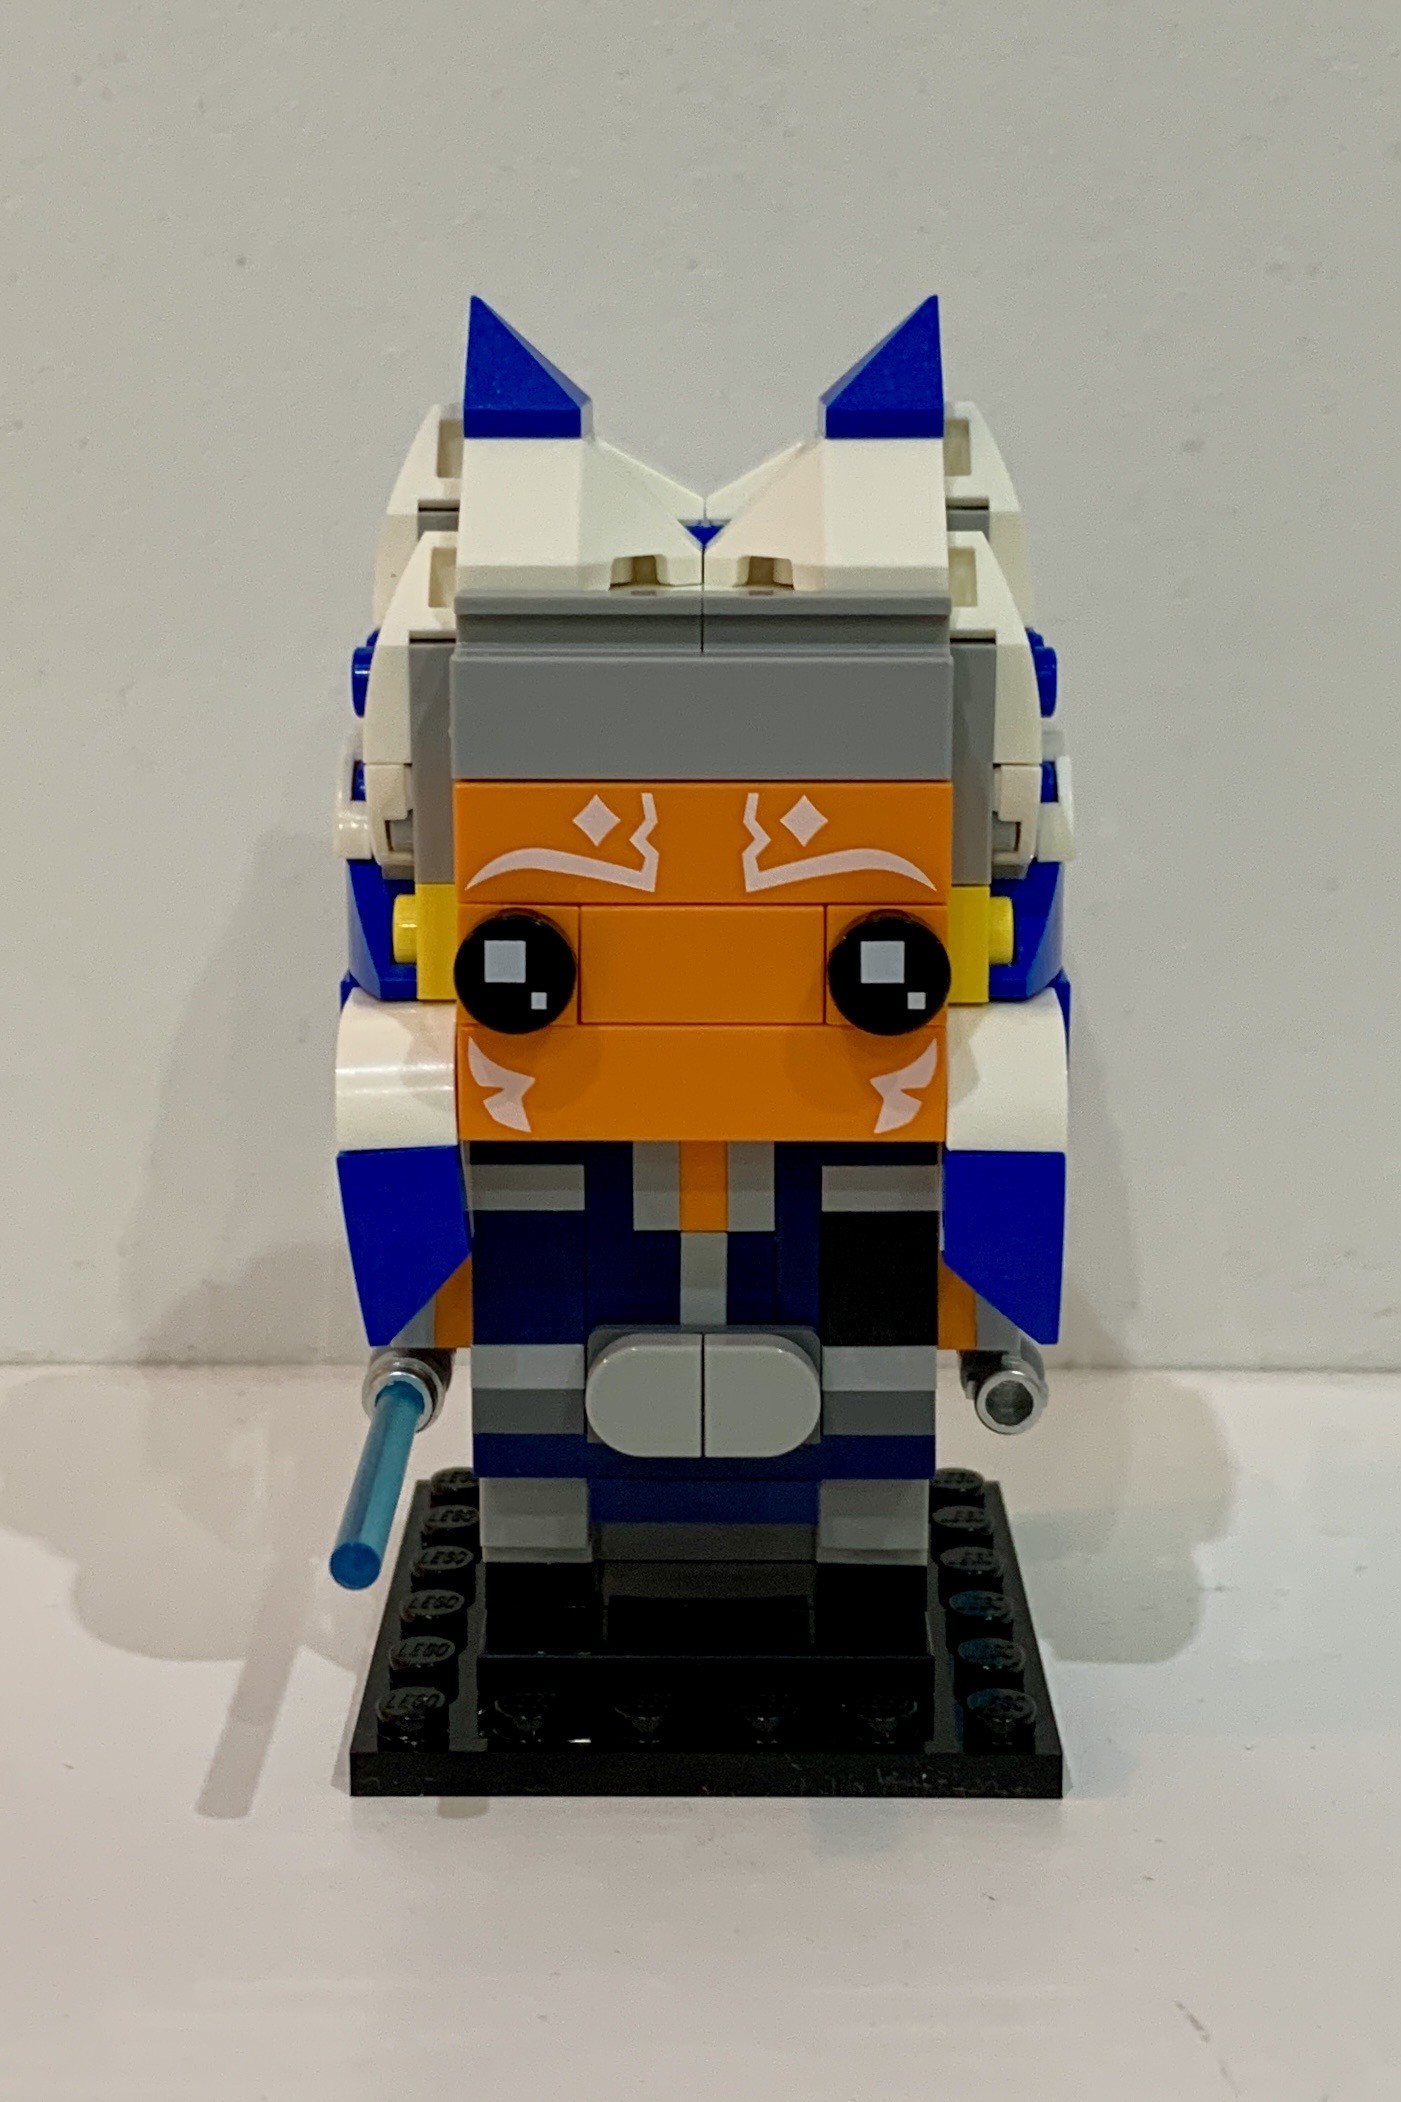 Lego BrickHeadz Ahsoka Nano from Star Wars. She is a humanoid with orange skin, white face marking and blue and white hair. She is wearing dark blue clothes and carrying two light blue light sabres.